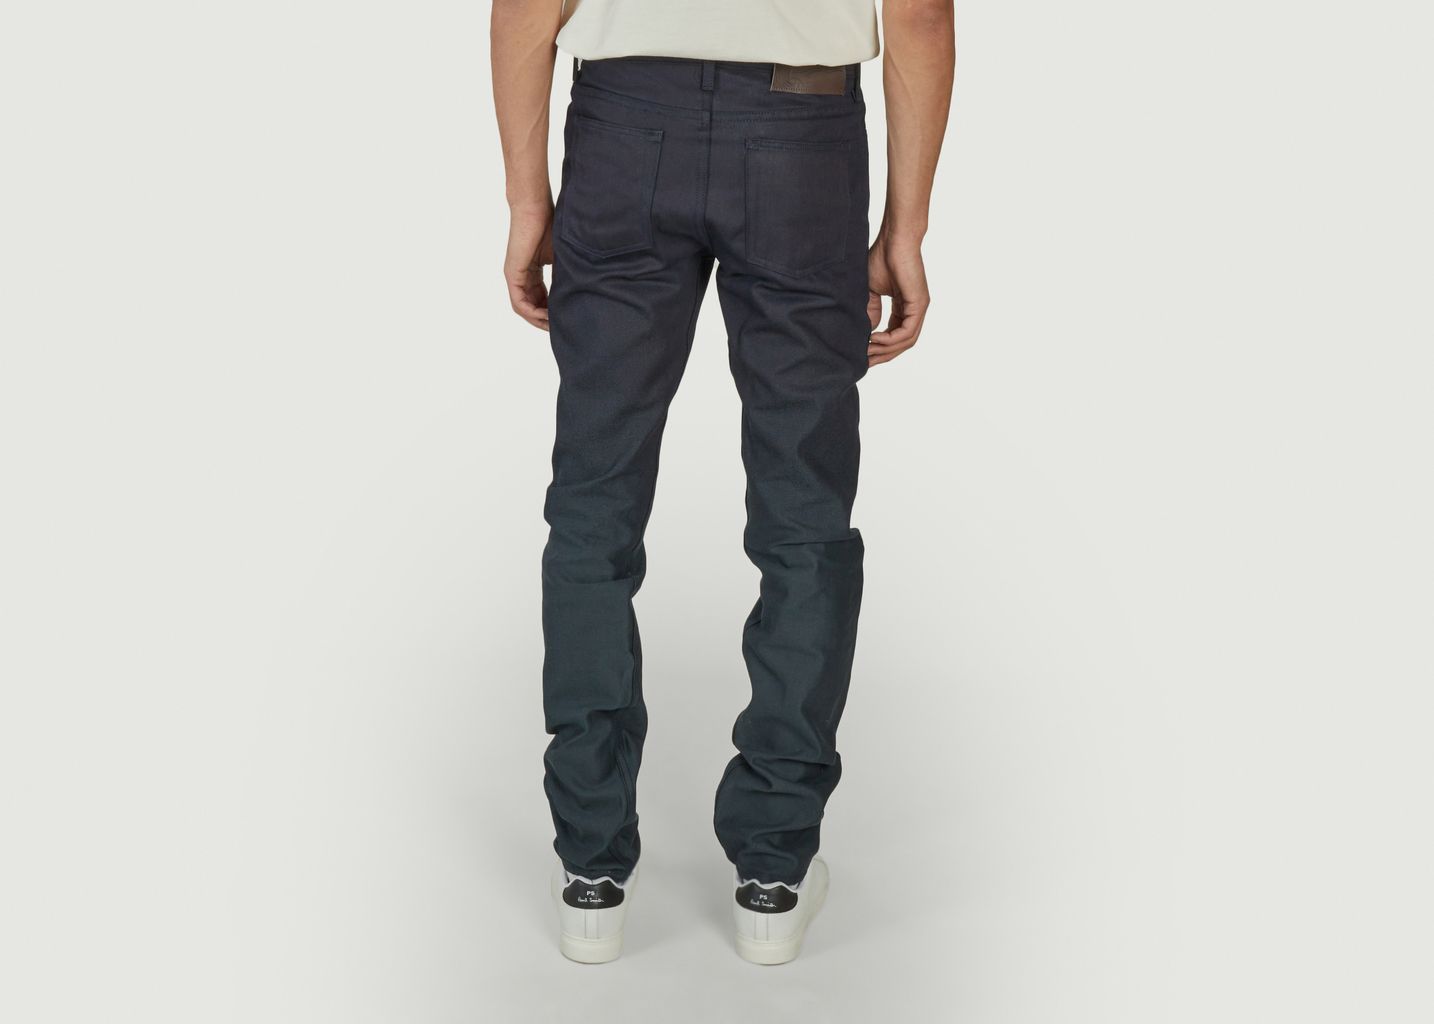 Weird Guy Gradient Denim Jeans - Naked and Famous